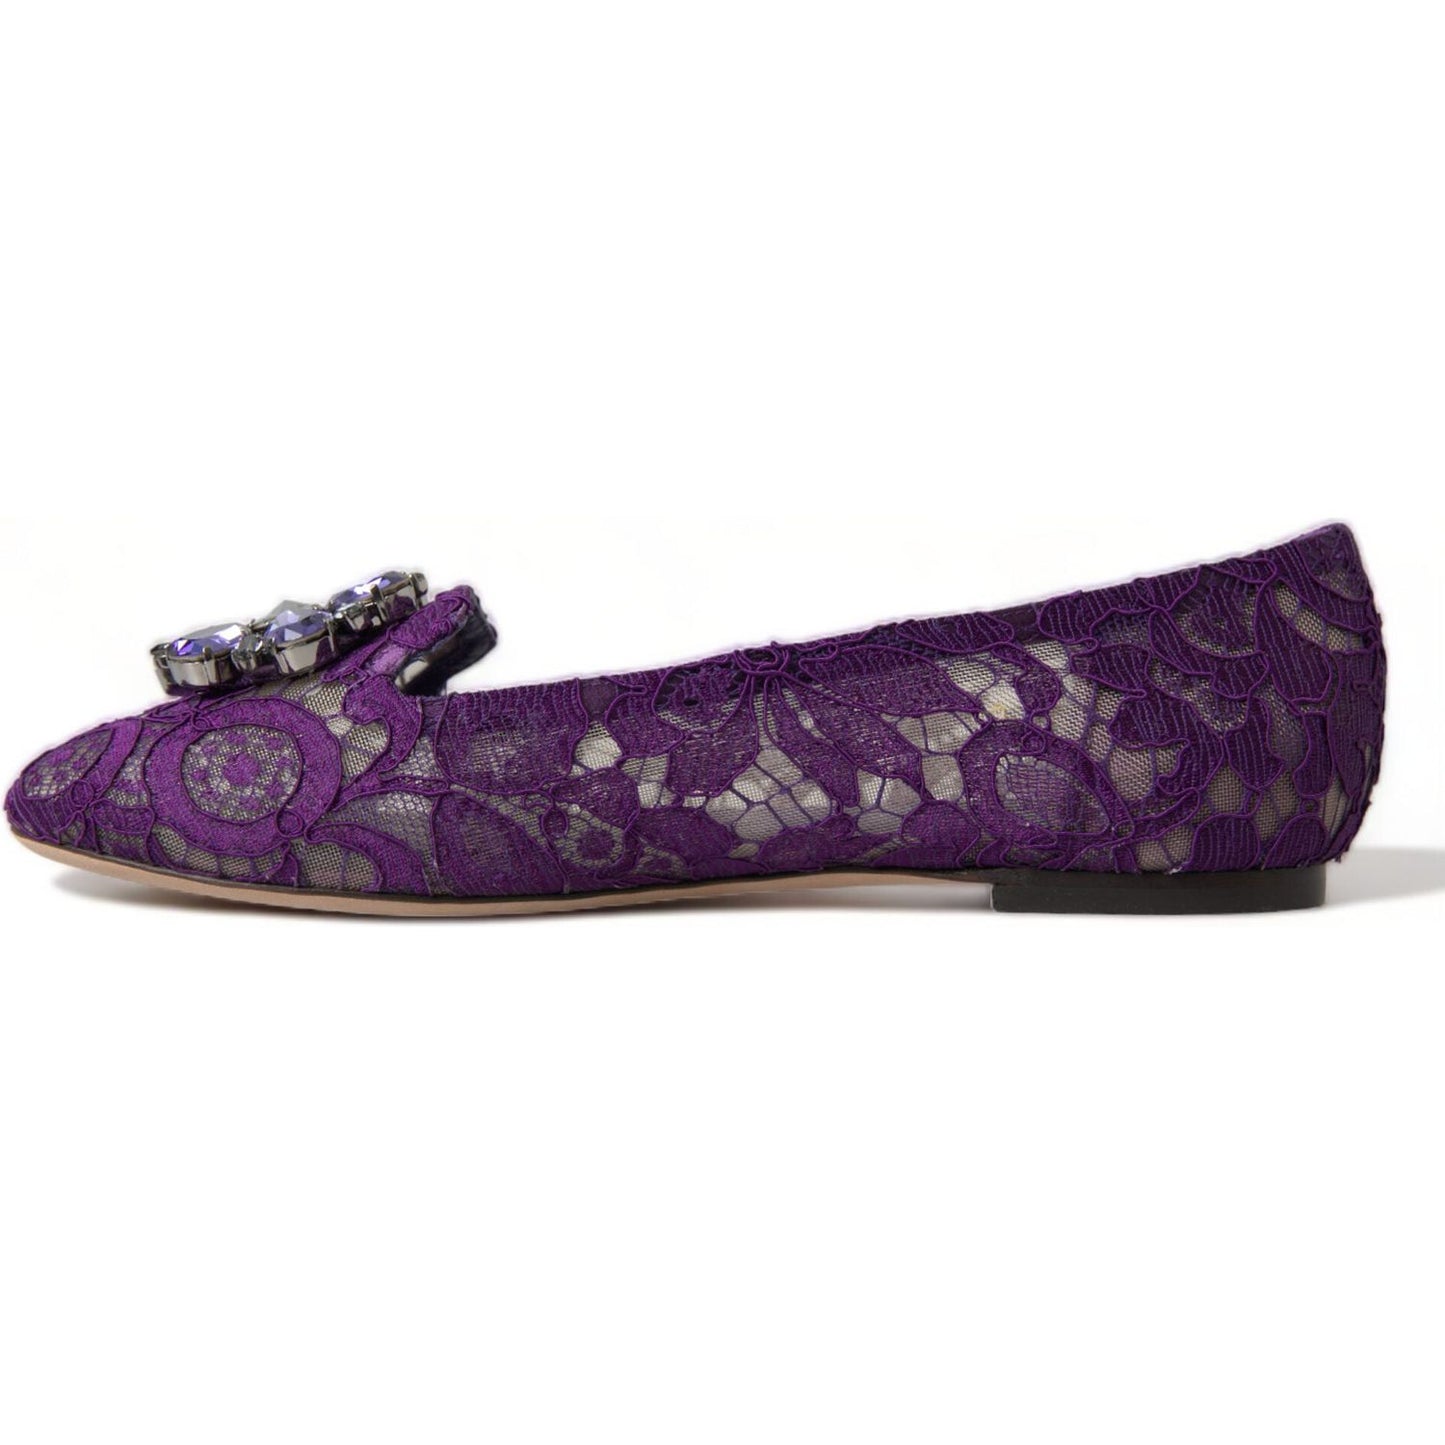 Dolce & Gabbana Elegant Floral Lace Vally Flat Shoes purple-vally-taormina-lace-crystals-flats-shoes 465A9042-bg-scaled-a4c63ddd-818.jpg